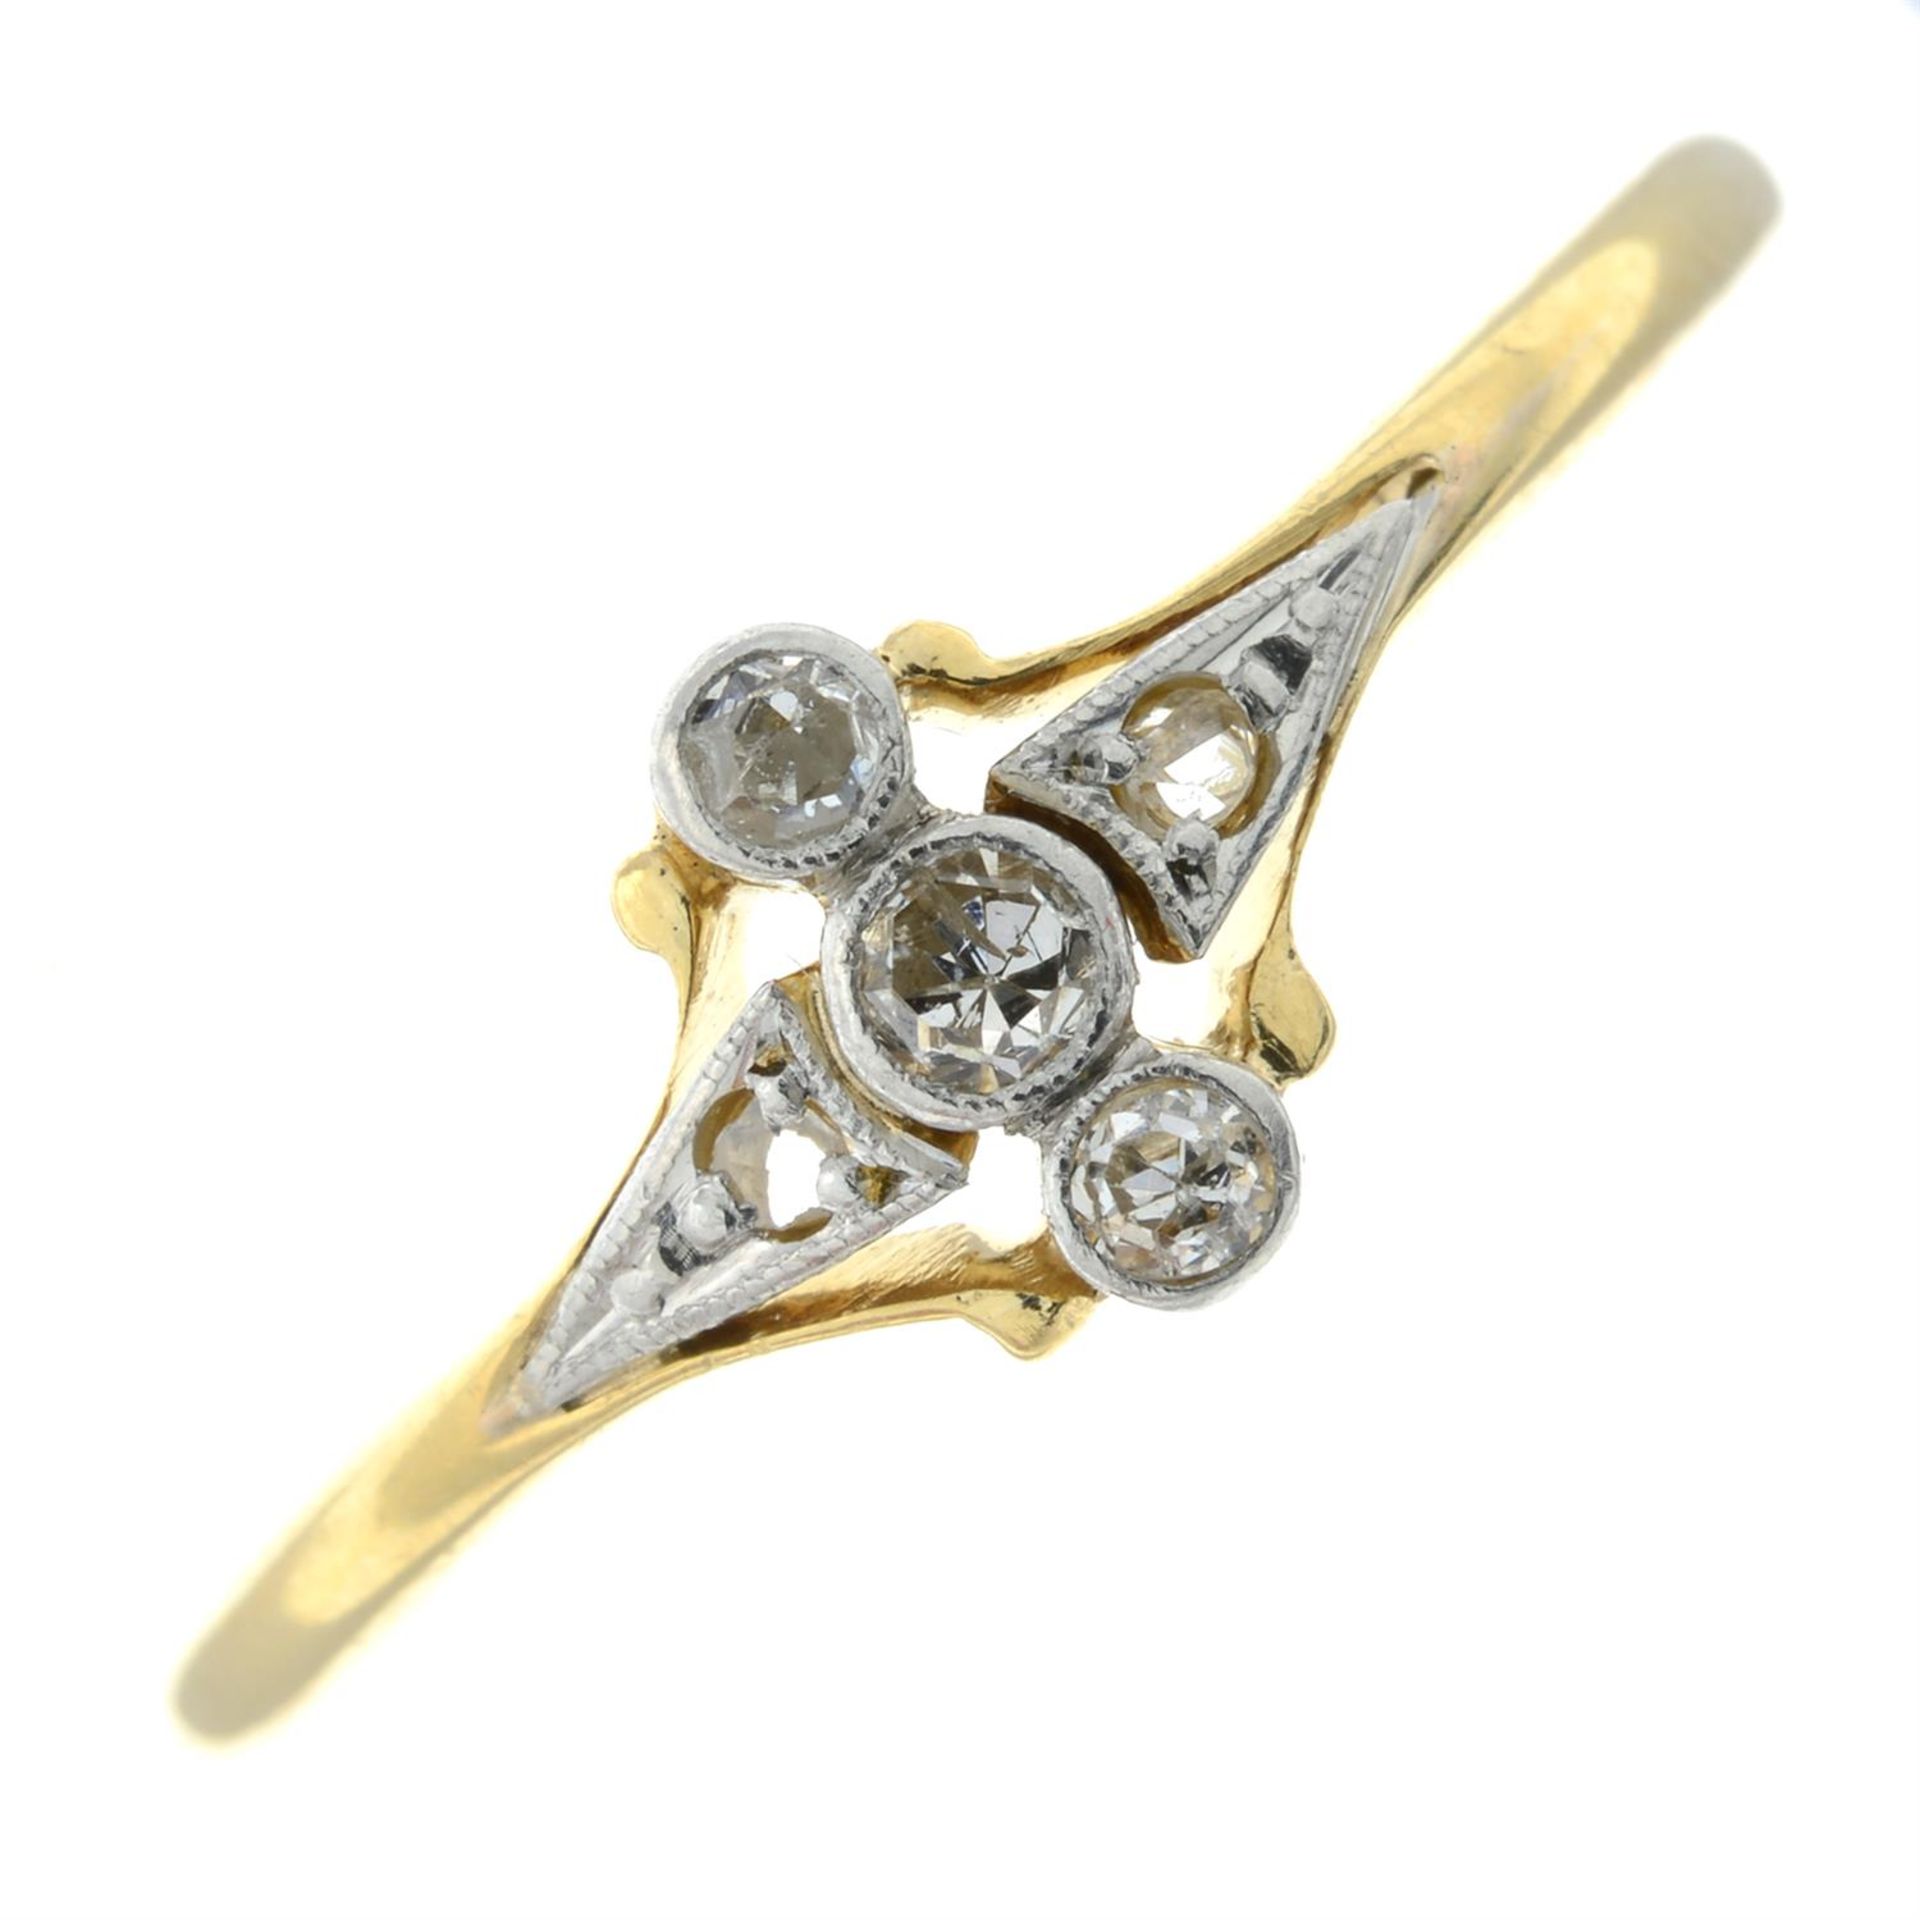 An early 20th century 18ct gold diamond dress ring.